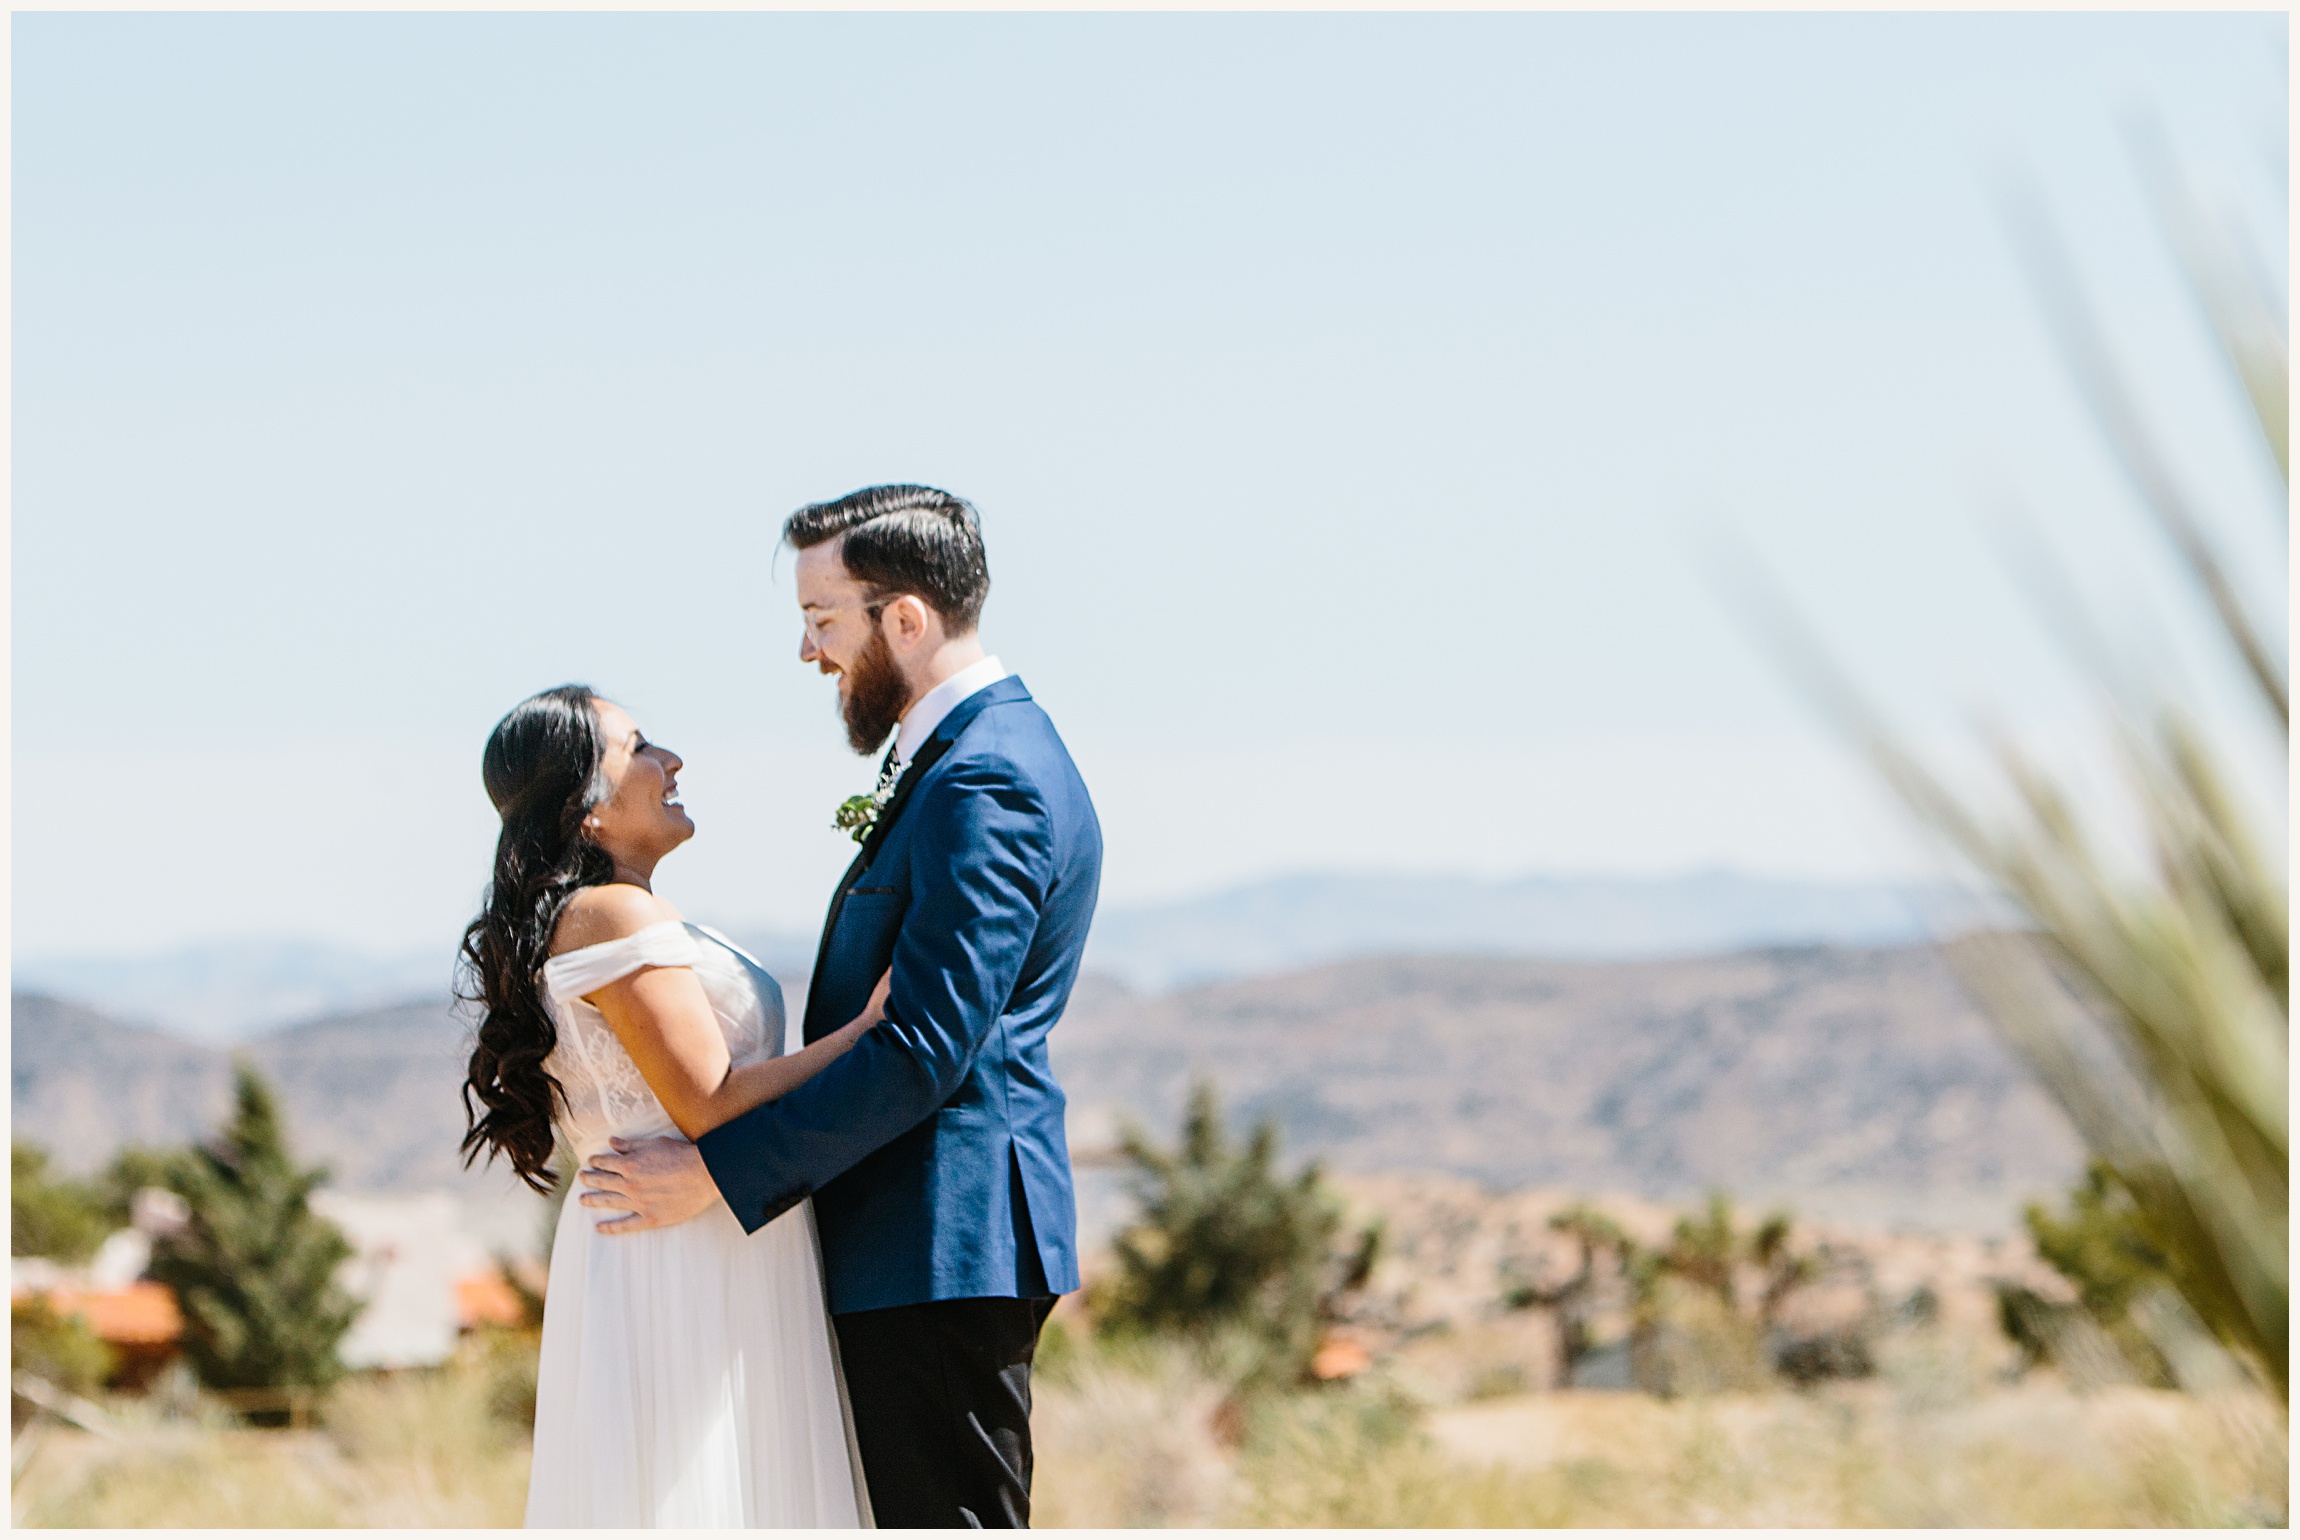 Photo of bride wearing off the shoulder white elopement dress and groom wearing a blue wedding suit